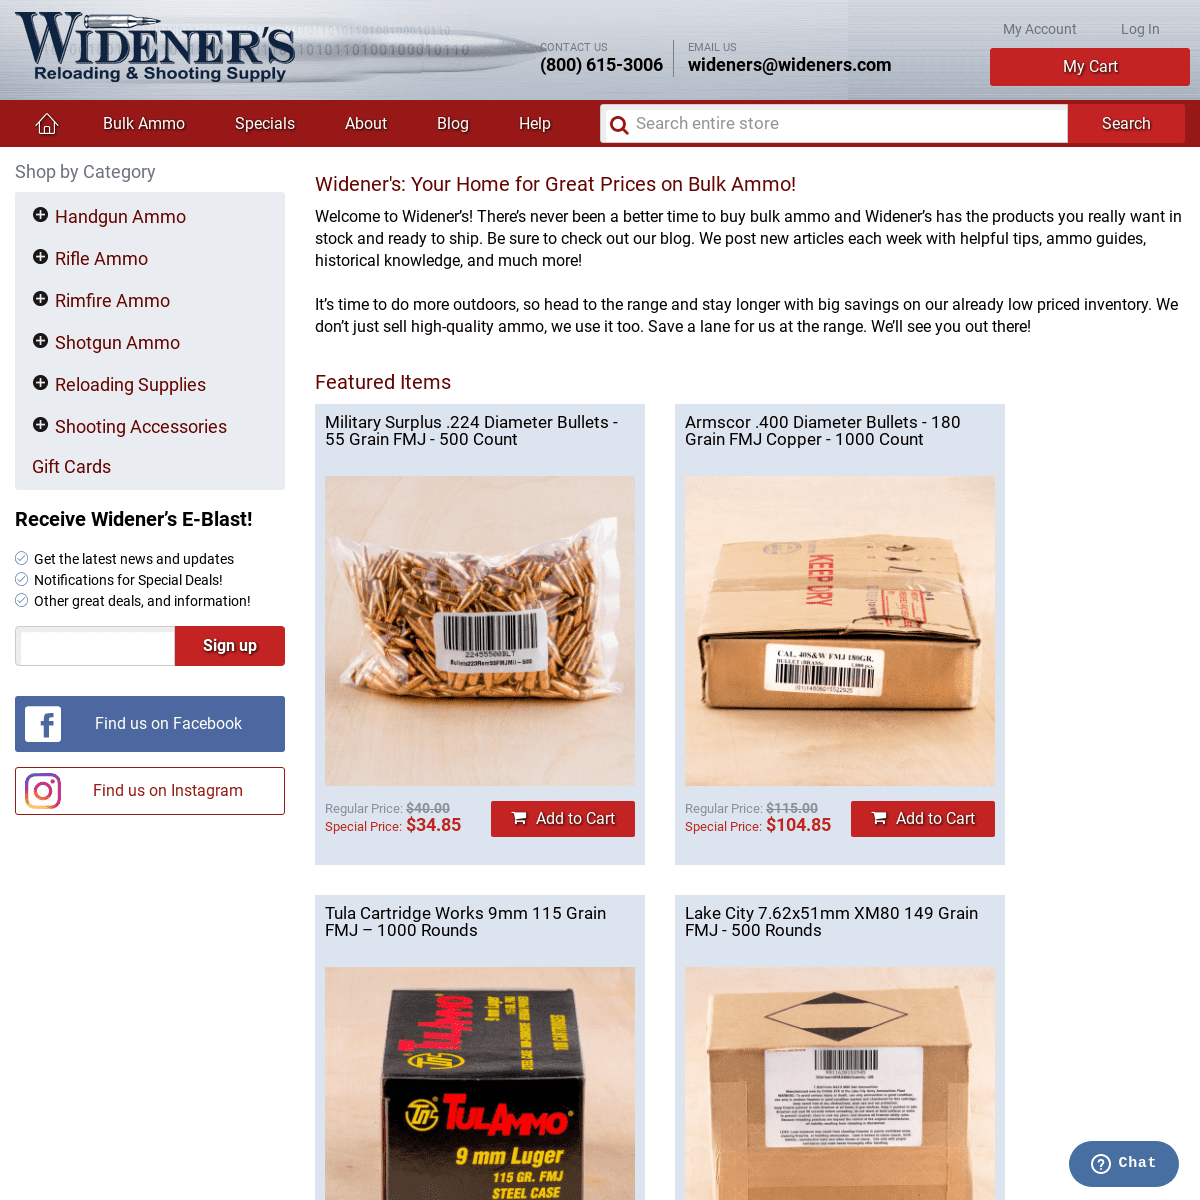 A complete backup of wideners.com